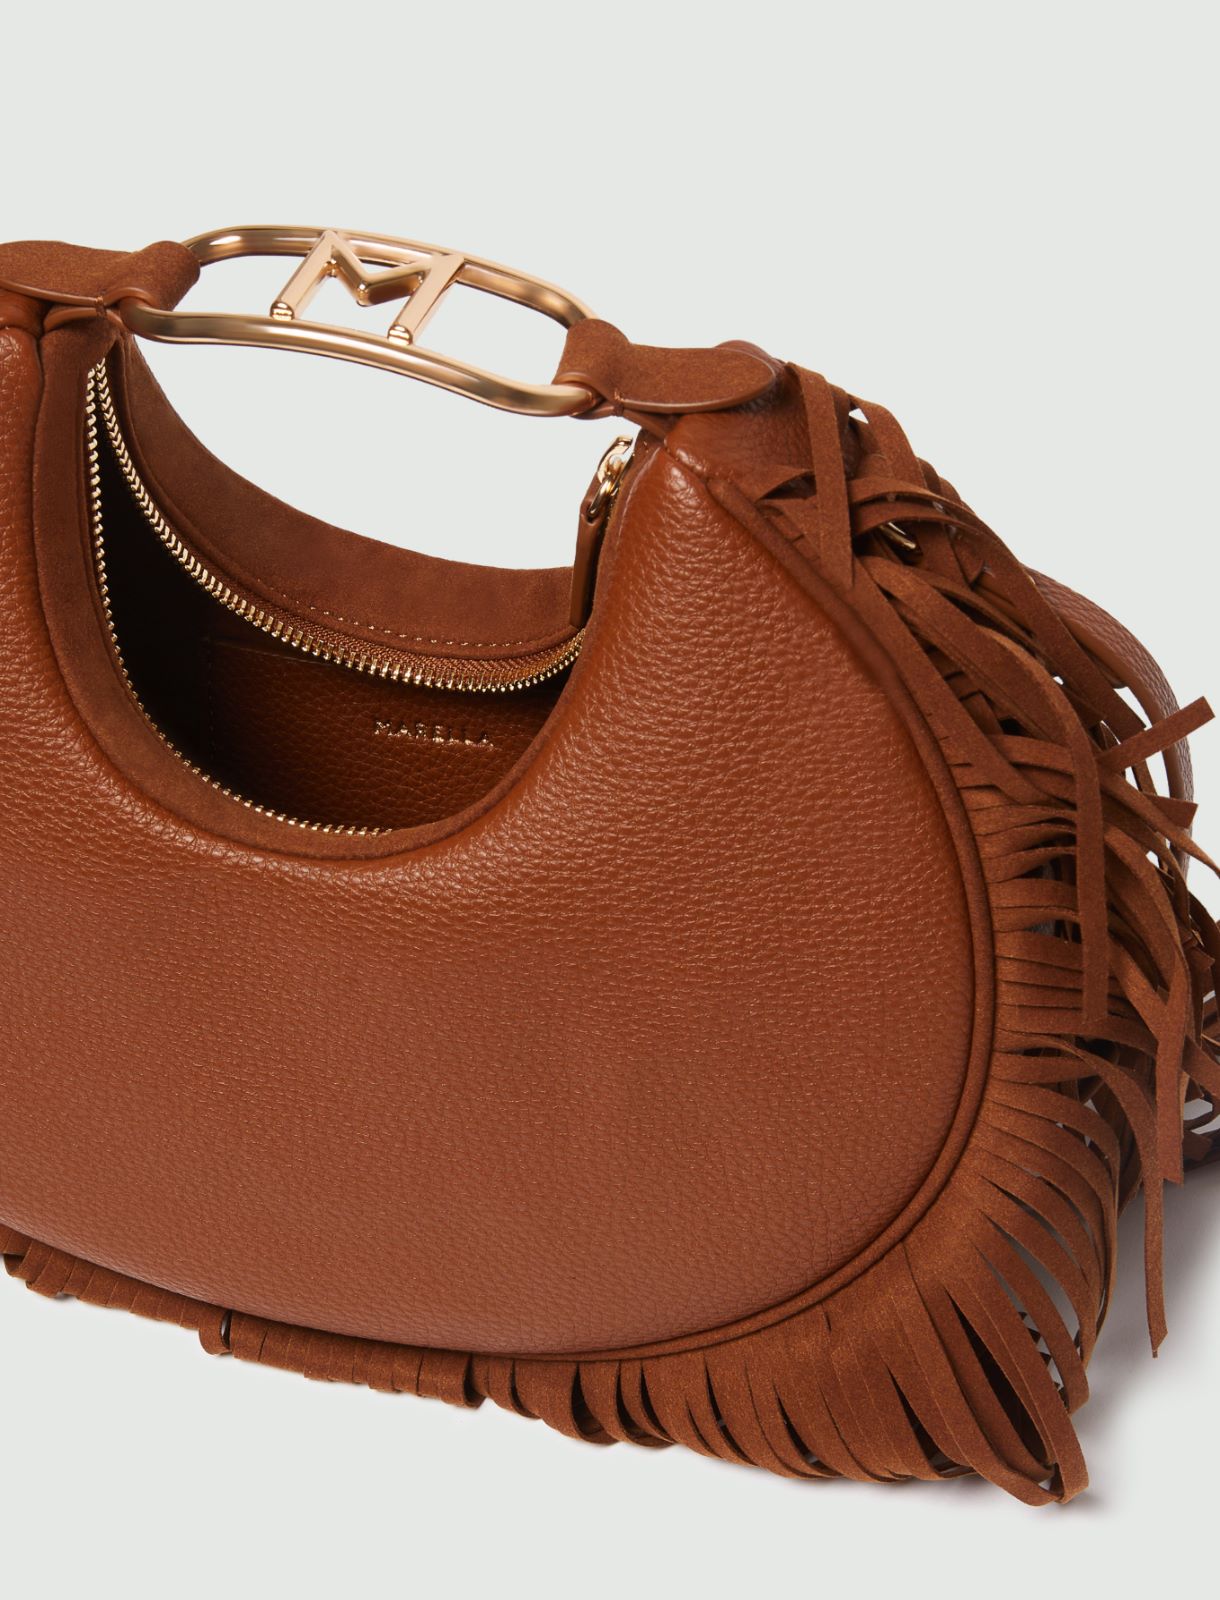 Small bag with fringes - Tobacco - Marella - 3